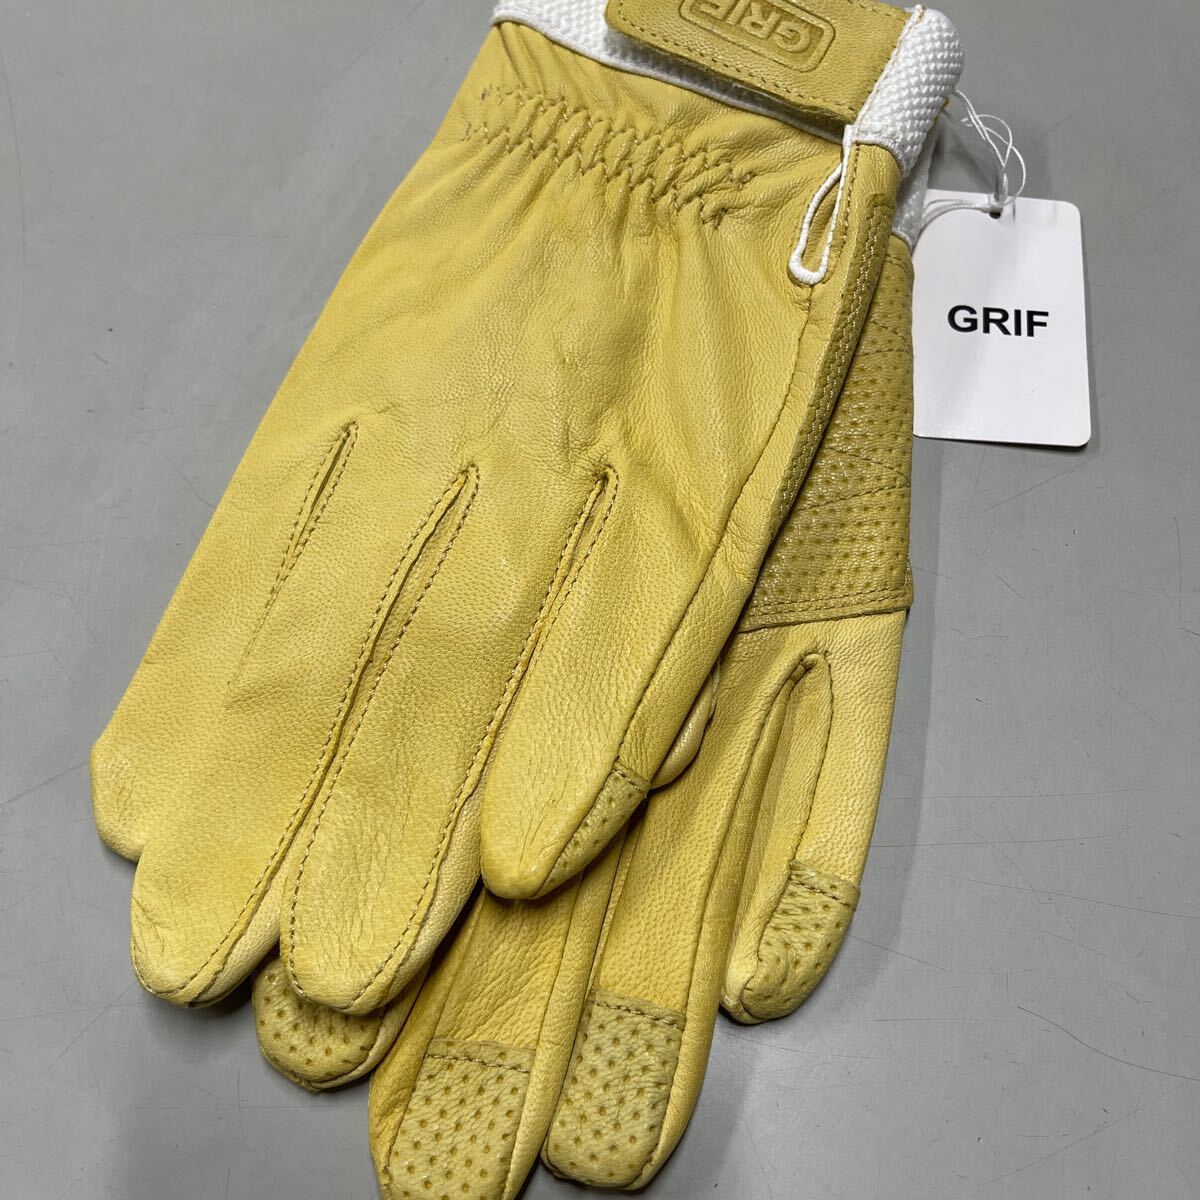 GRIF goat leather go-tos gold leather original leather unused gloves glove beige 25 centimeter LL size India made 